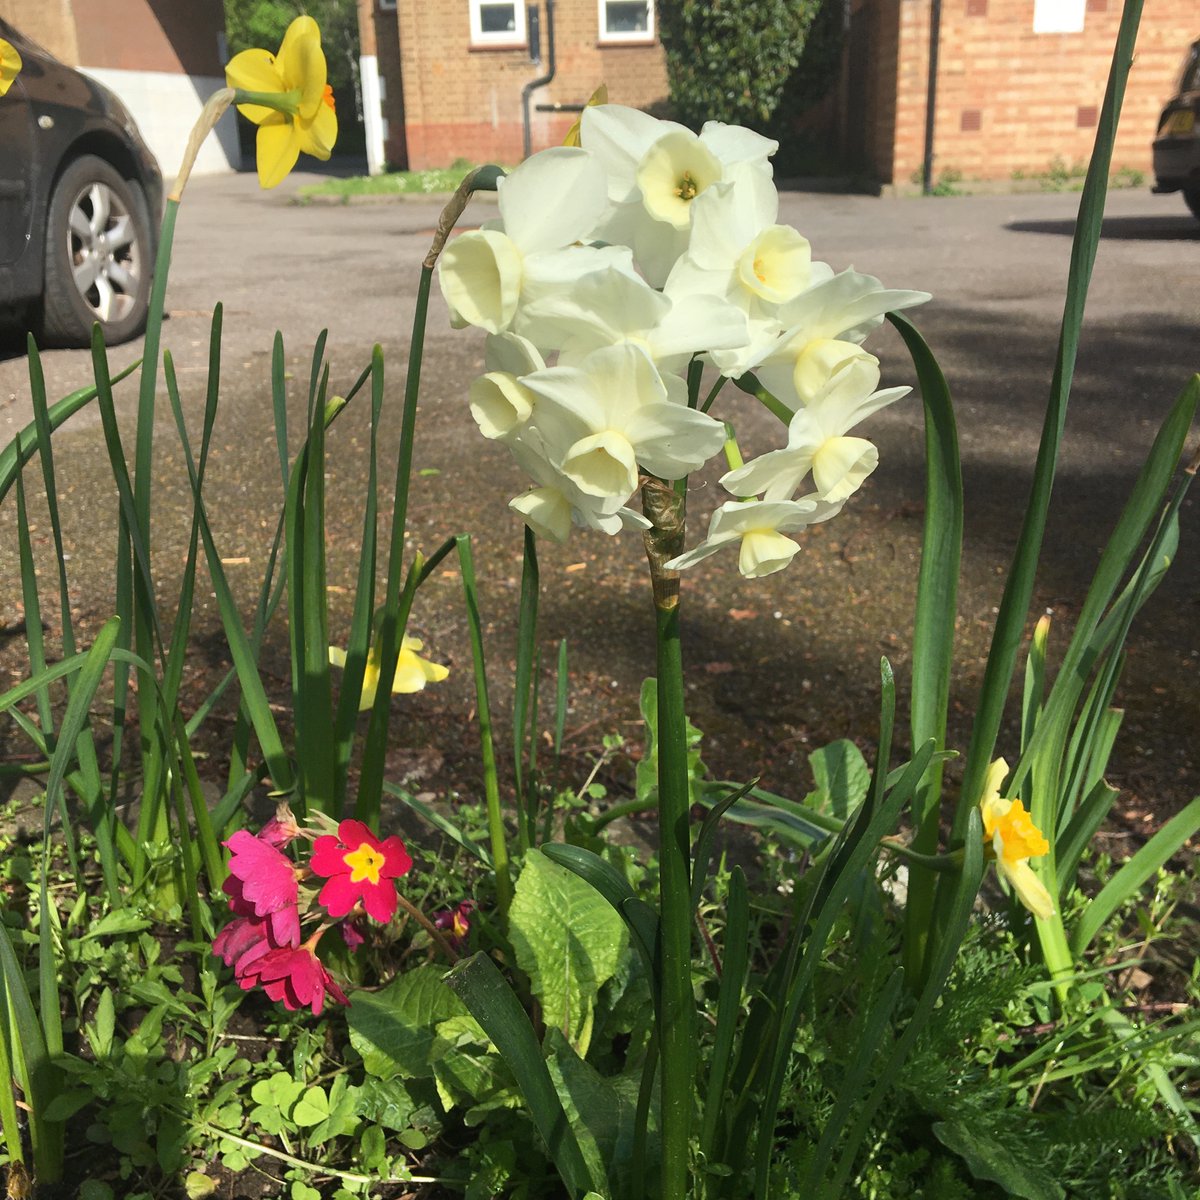 Edges of car parks brightened up with residents donated bulbs …blooming. #chertseycourt
#communitygardens
#communitygardeners